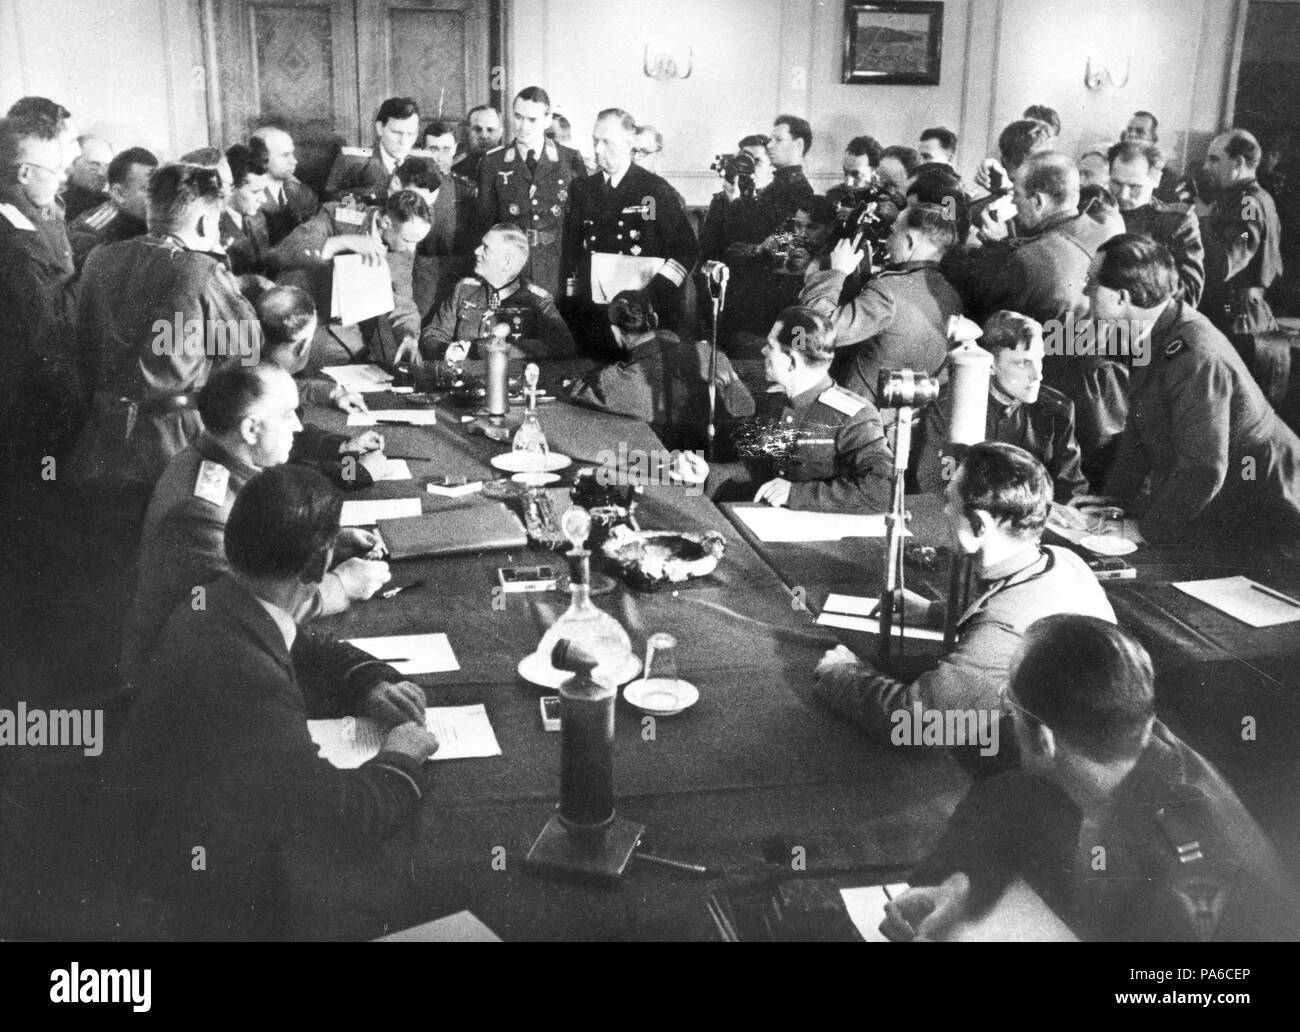 The signing the German Instrument of Surrender in Berlin, May 8, 1945. Museum: State Central Military Museum, Moscow. Stock Photo